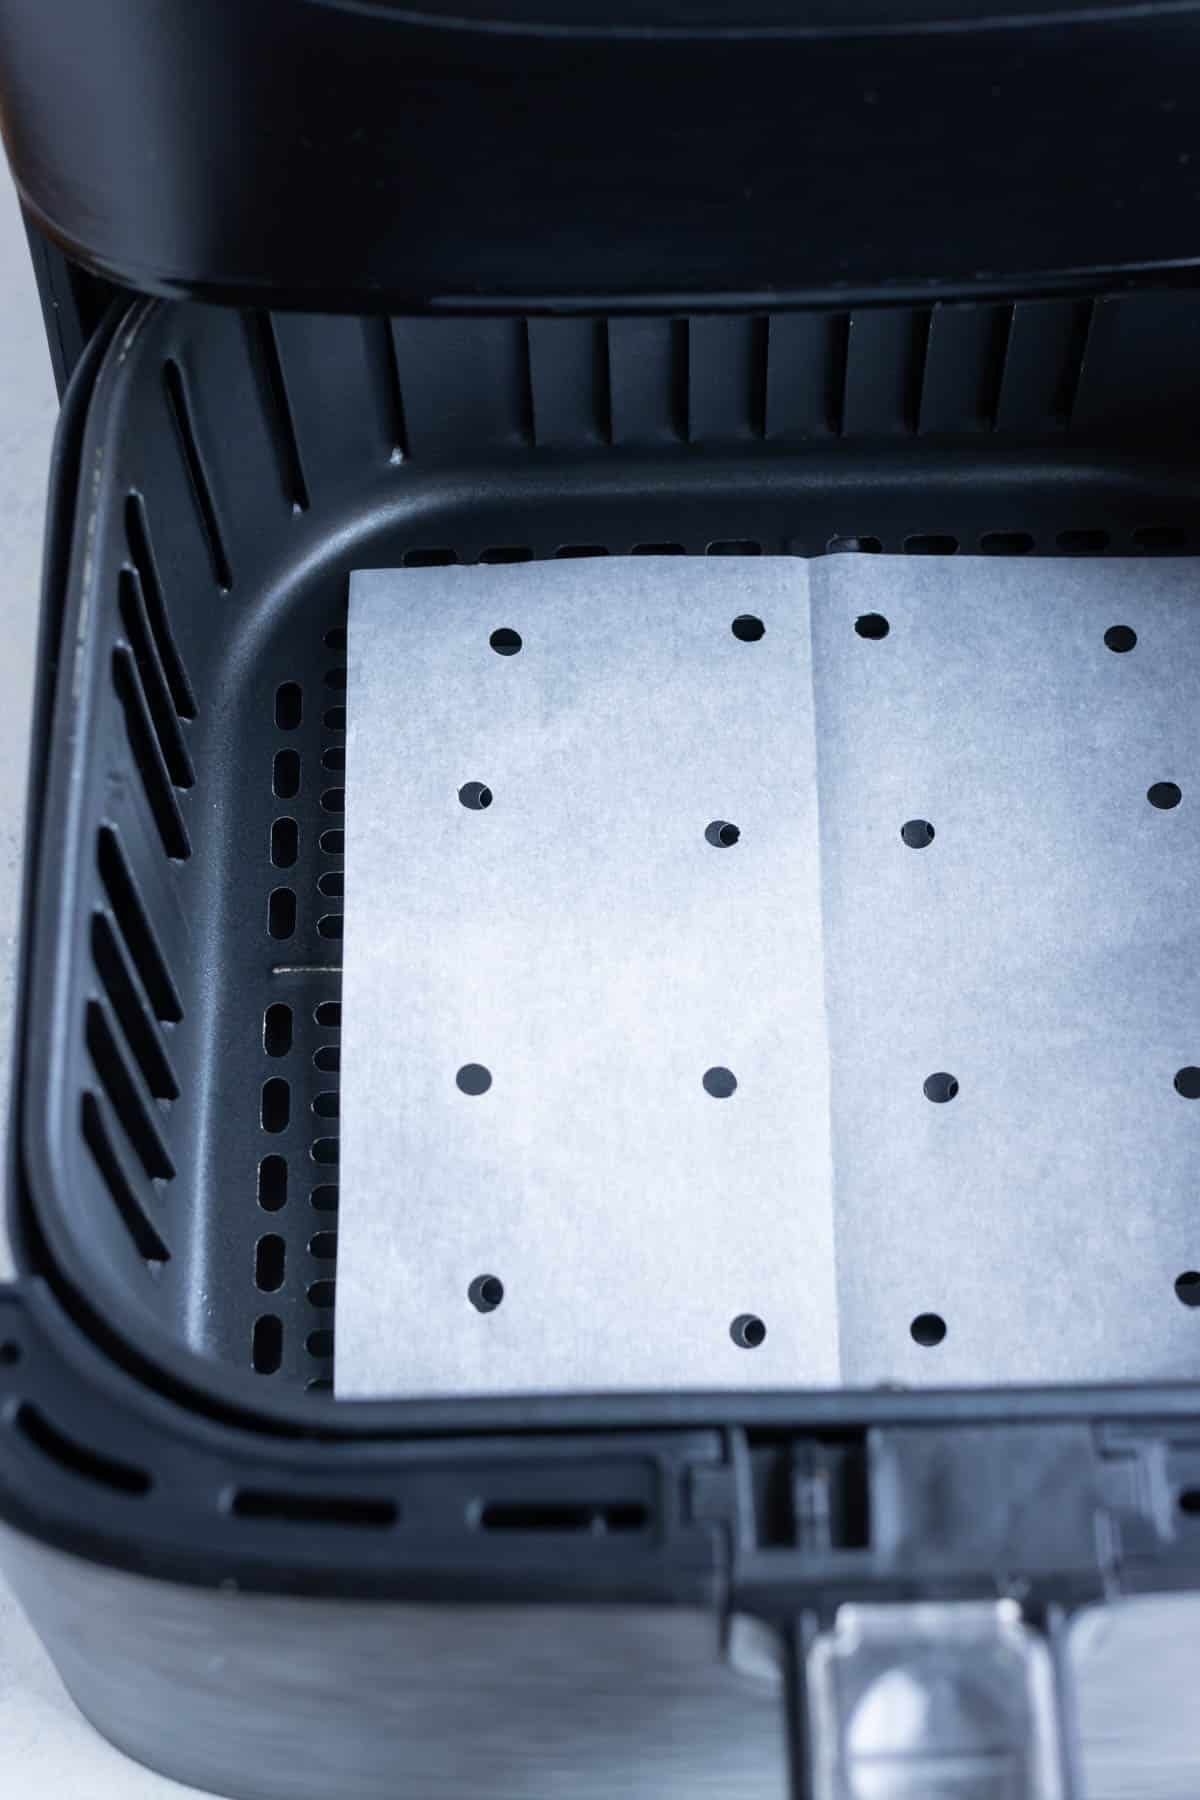 Parchment paper at the bottom of an air fryer basket with hole punches.